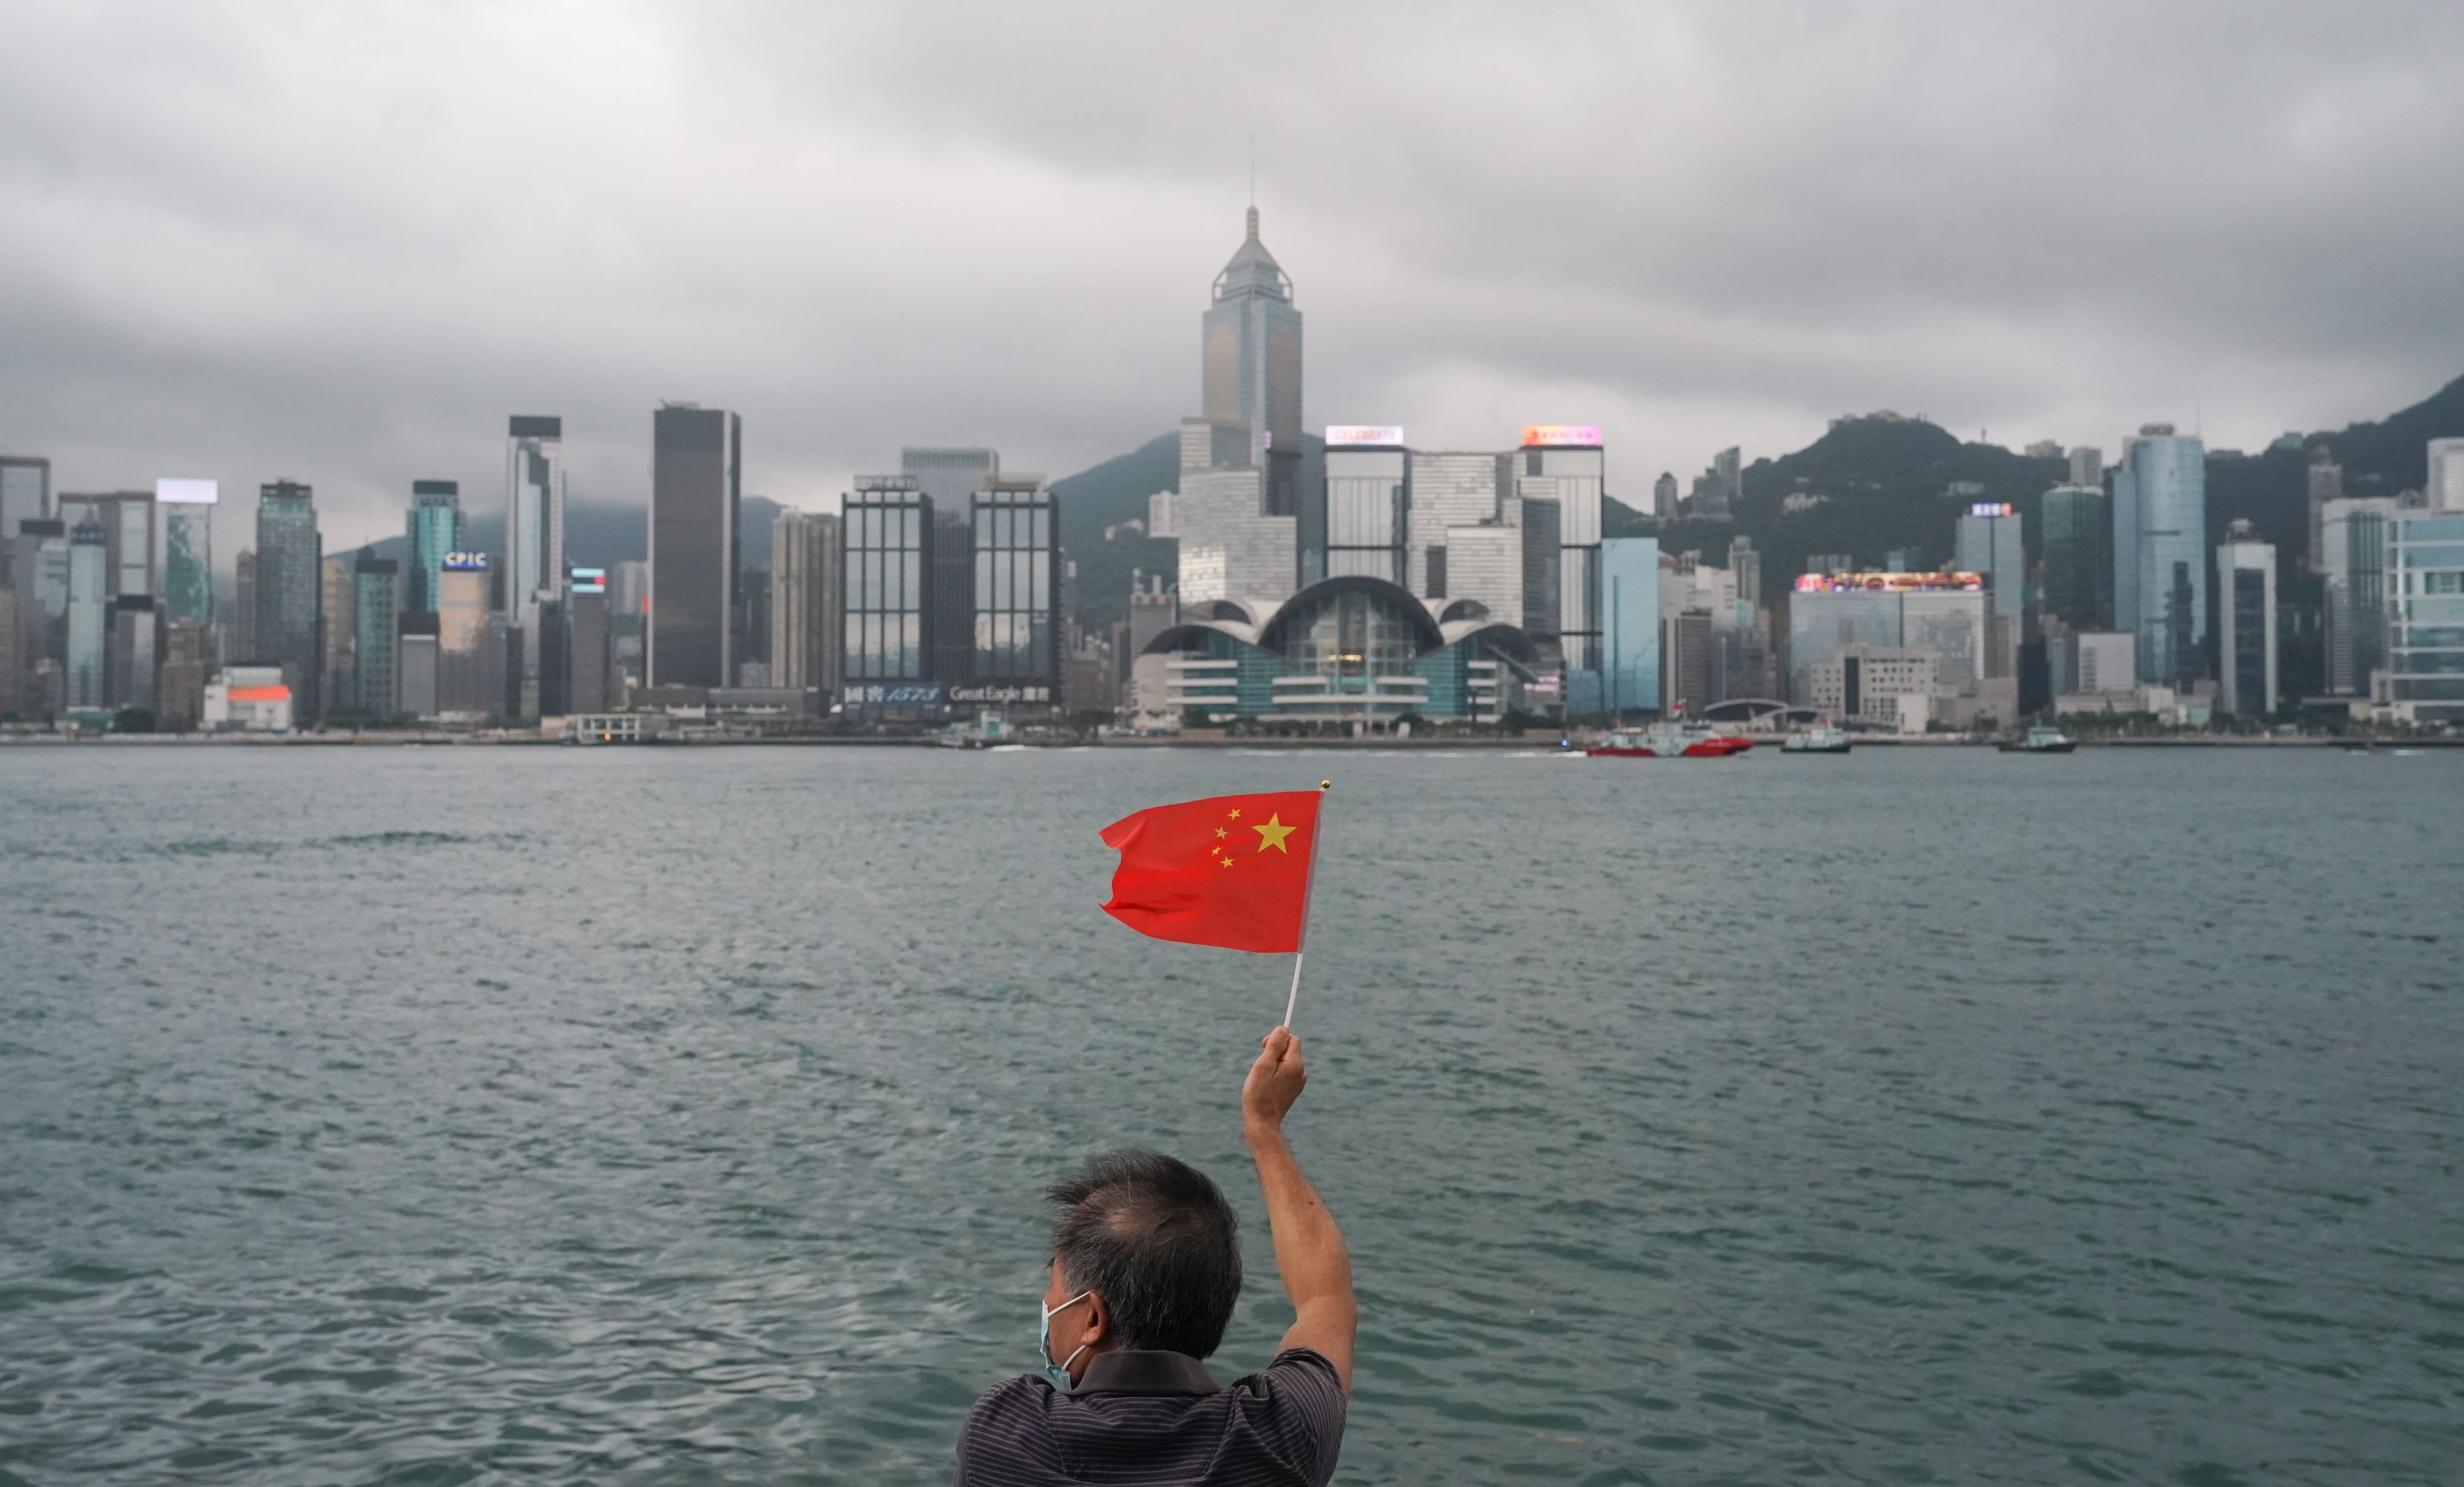 Hong Kong has always been an economic city and not a political city, says former leader. Photo: Felix Wong